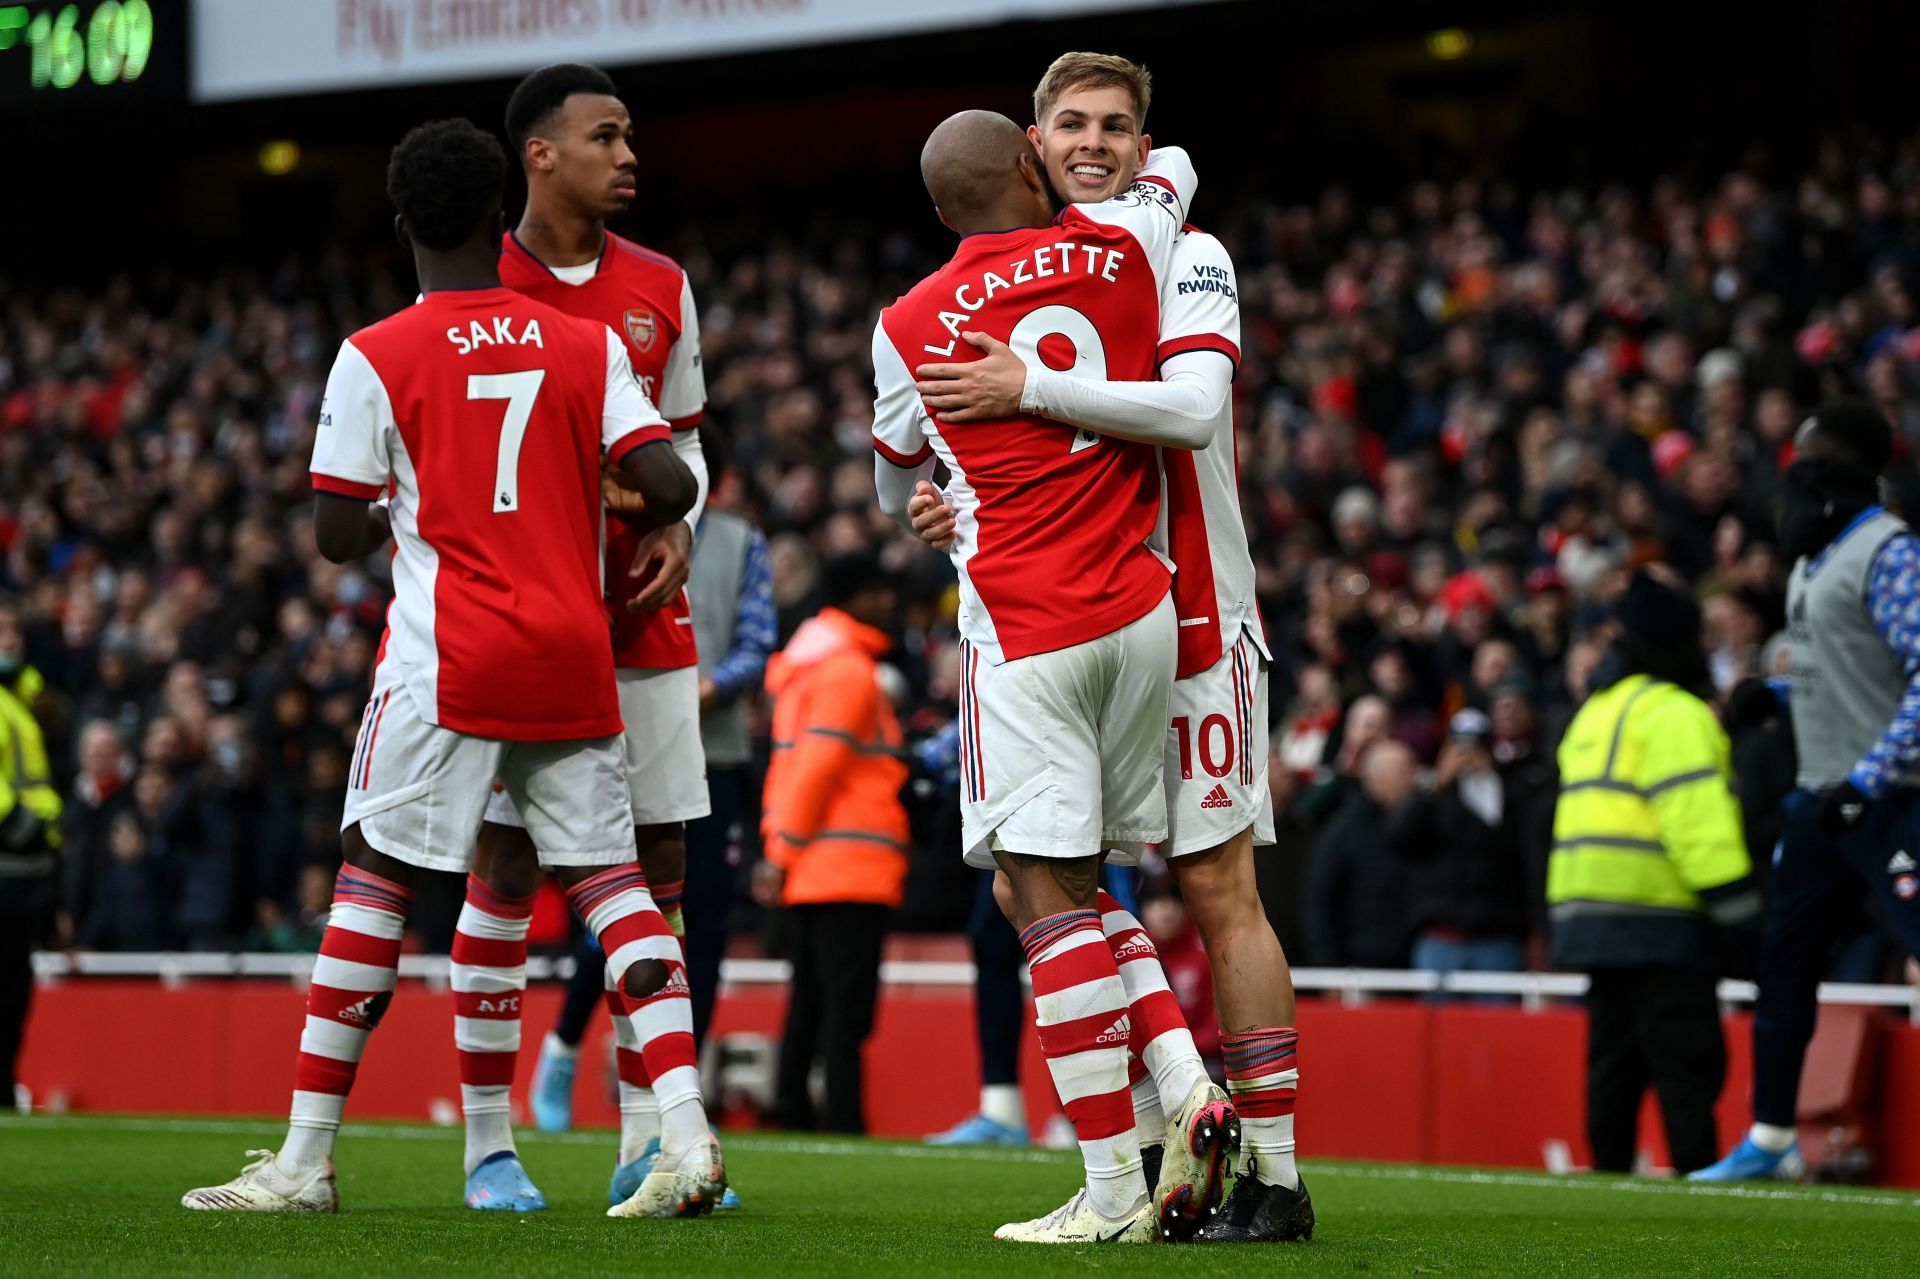 Emile Smith Rowe has been very impactful for Arsenal this season